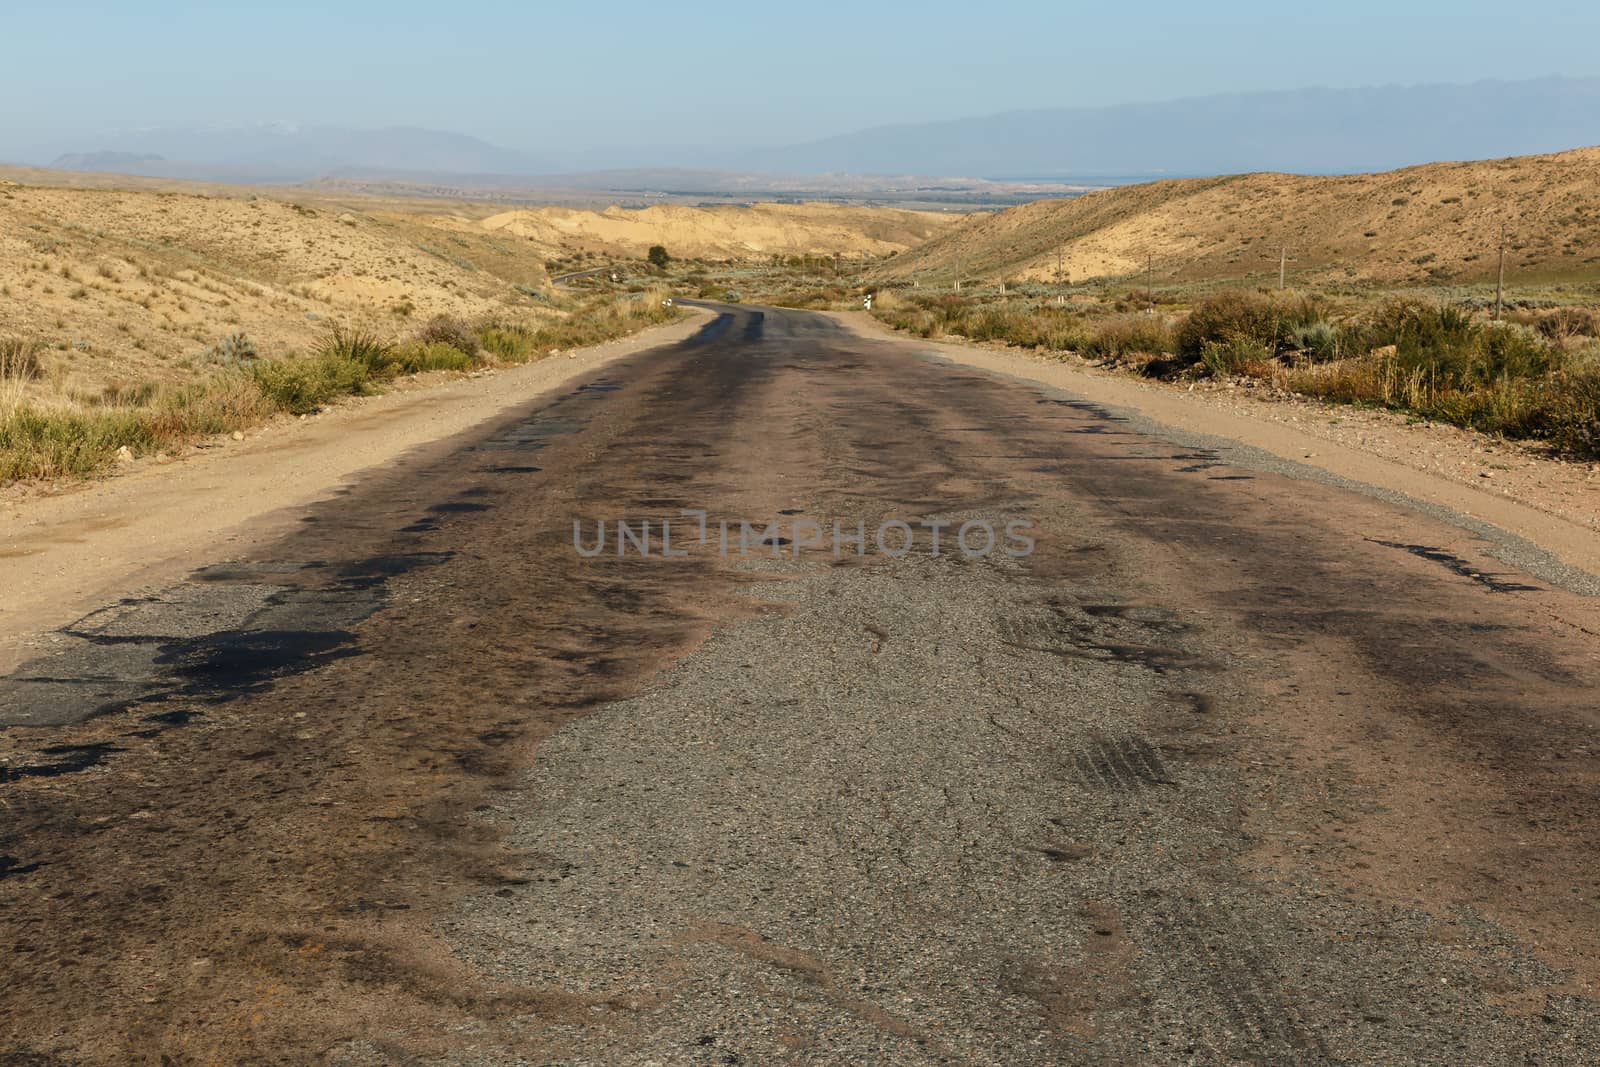 A363 highway, asphalt road along the southern shore of Lake Issyk-Kul in Kyrgyzstan.